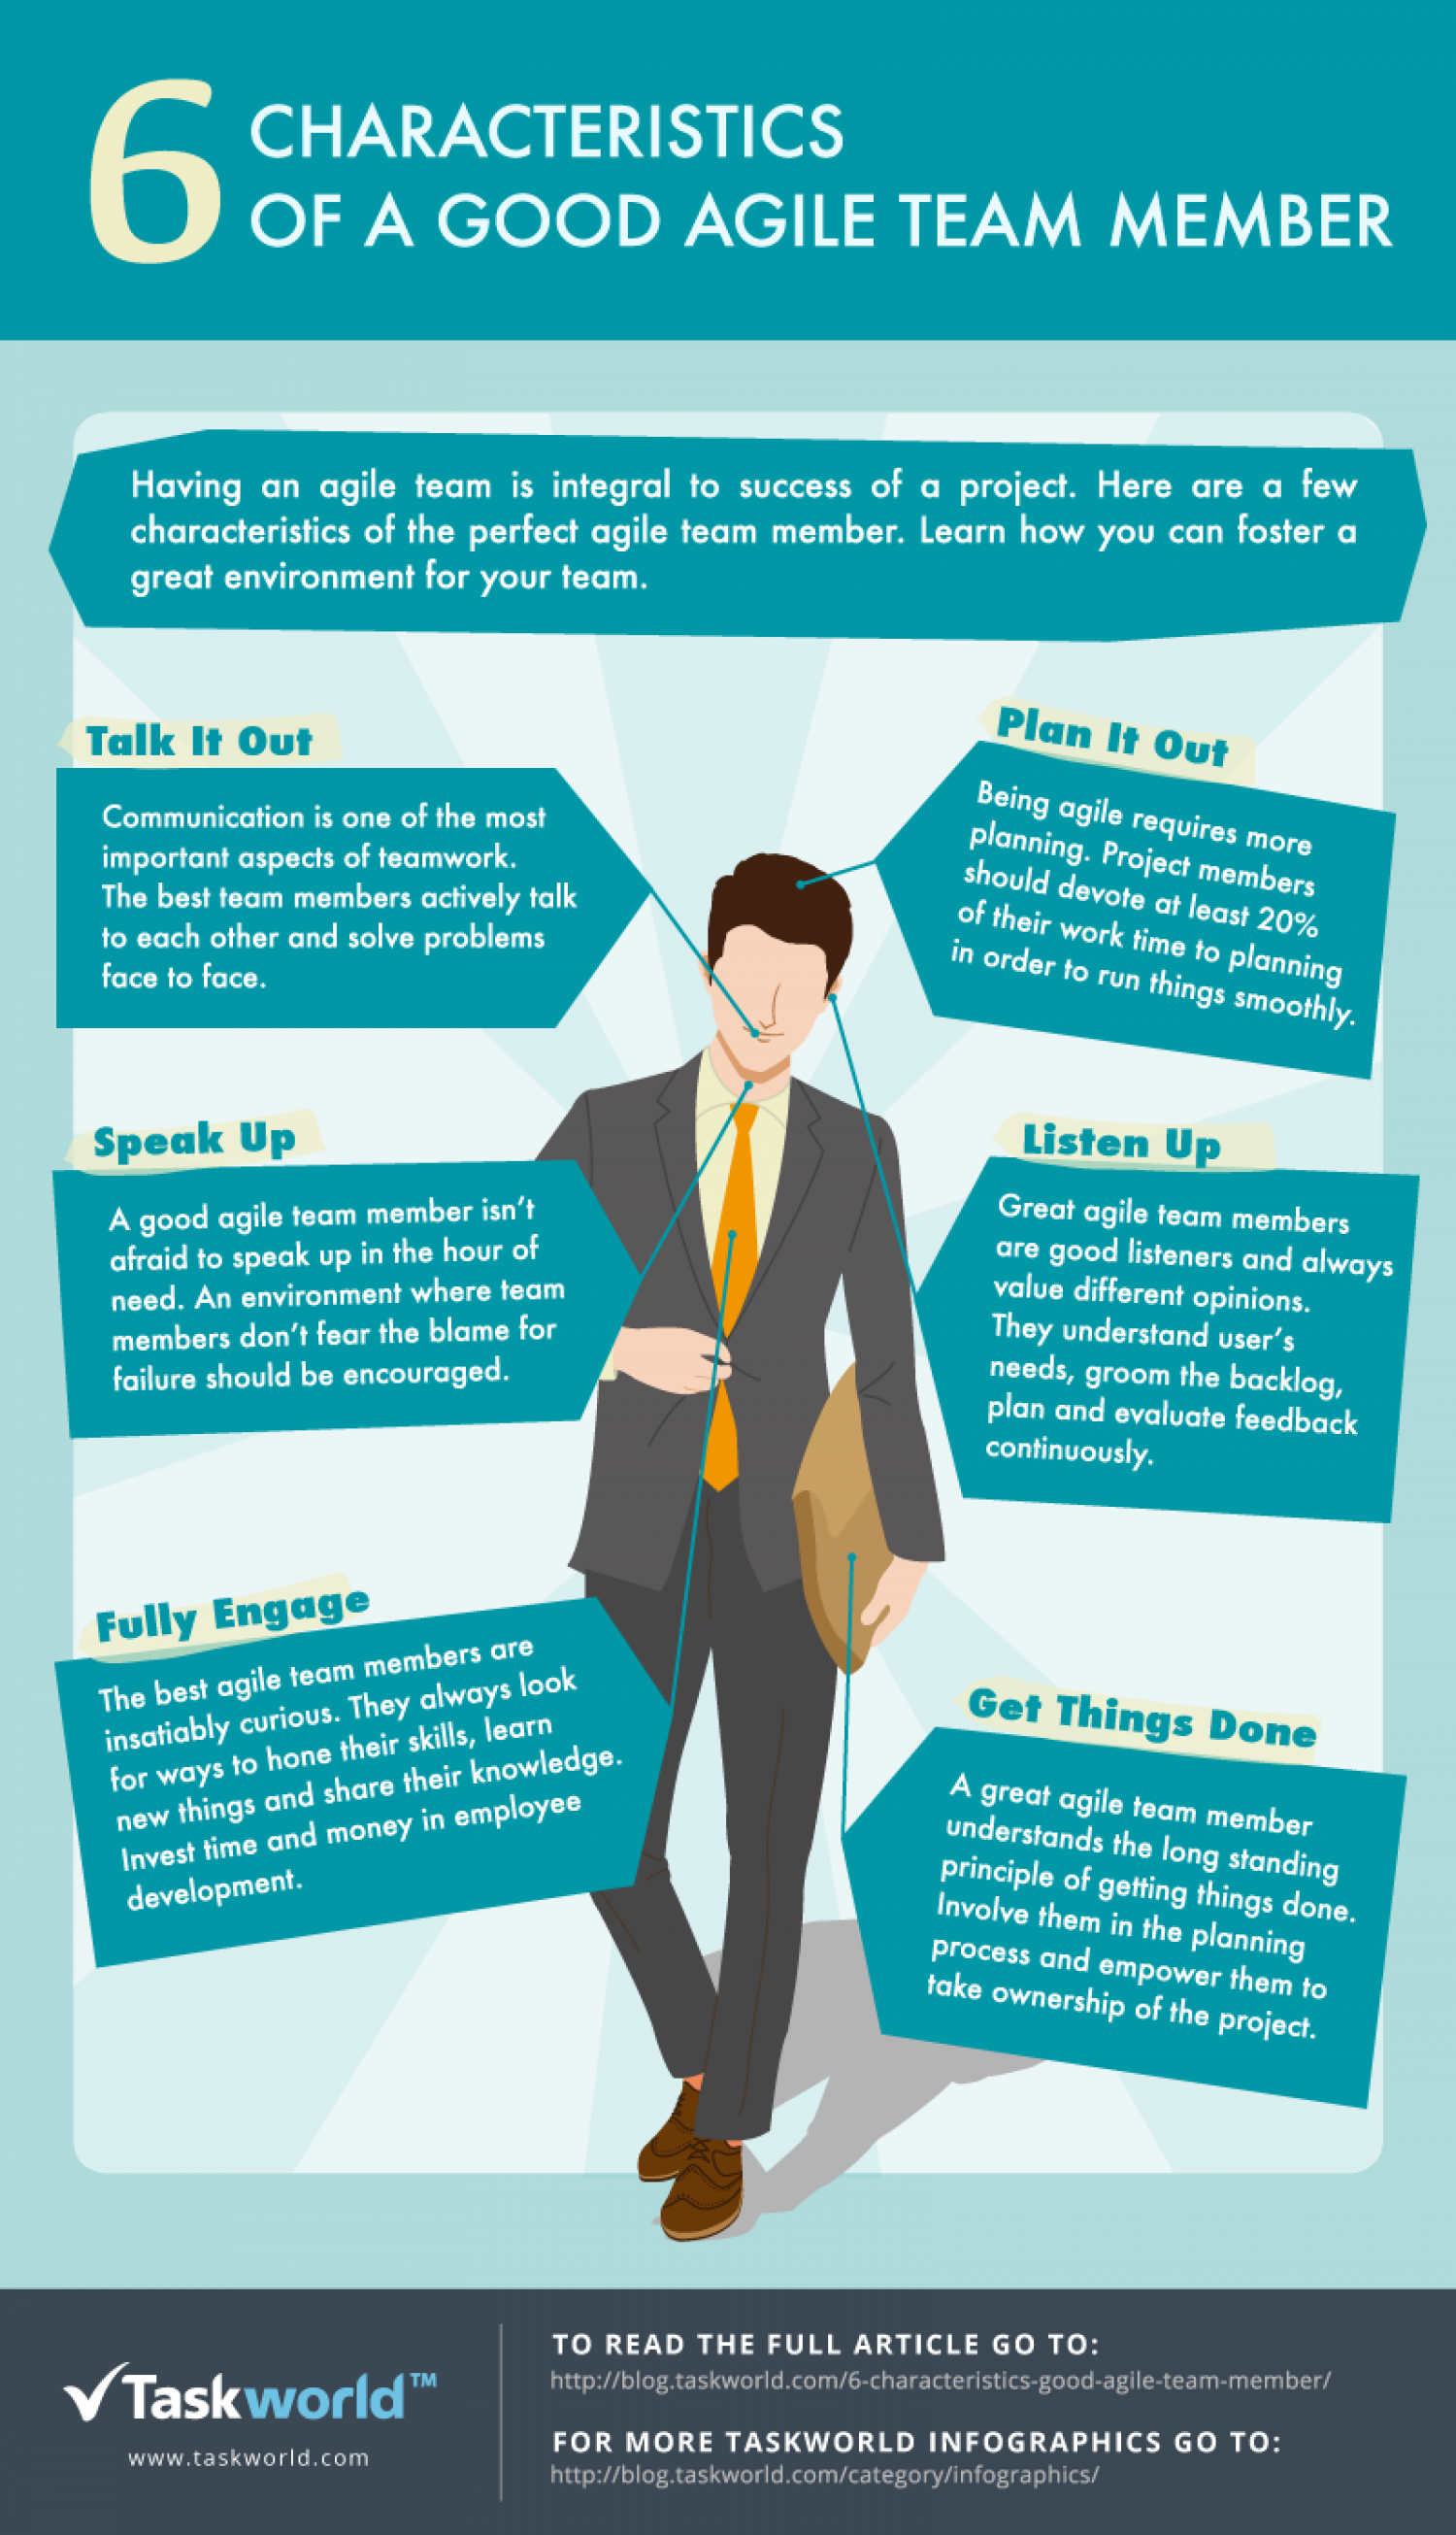 6 Characteristics of a Good Agile Team Member Infographic